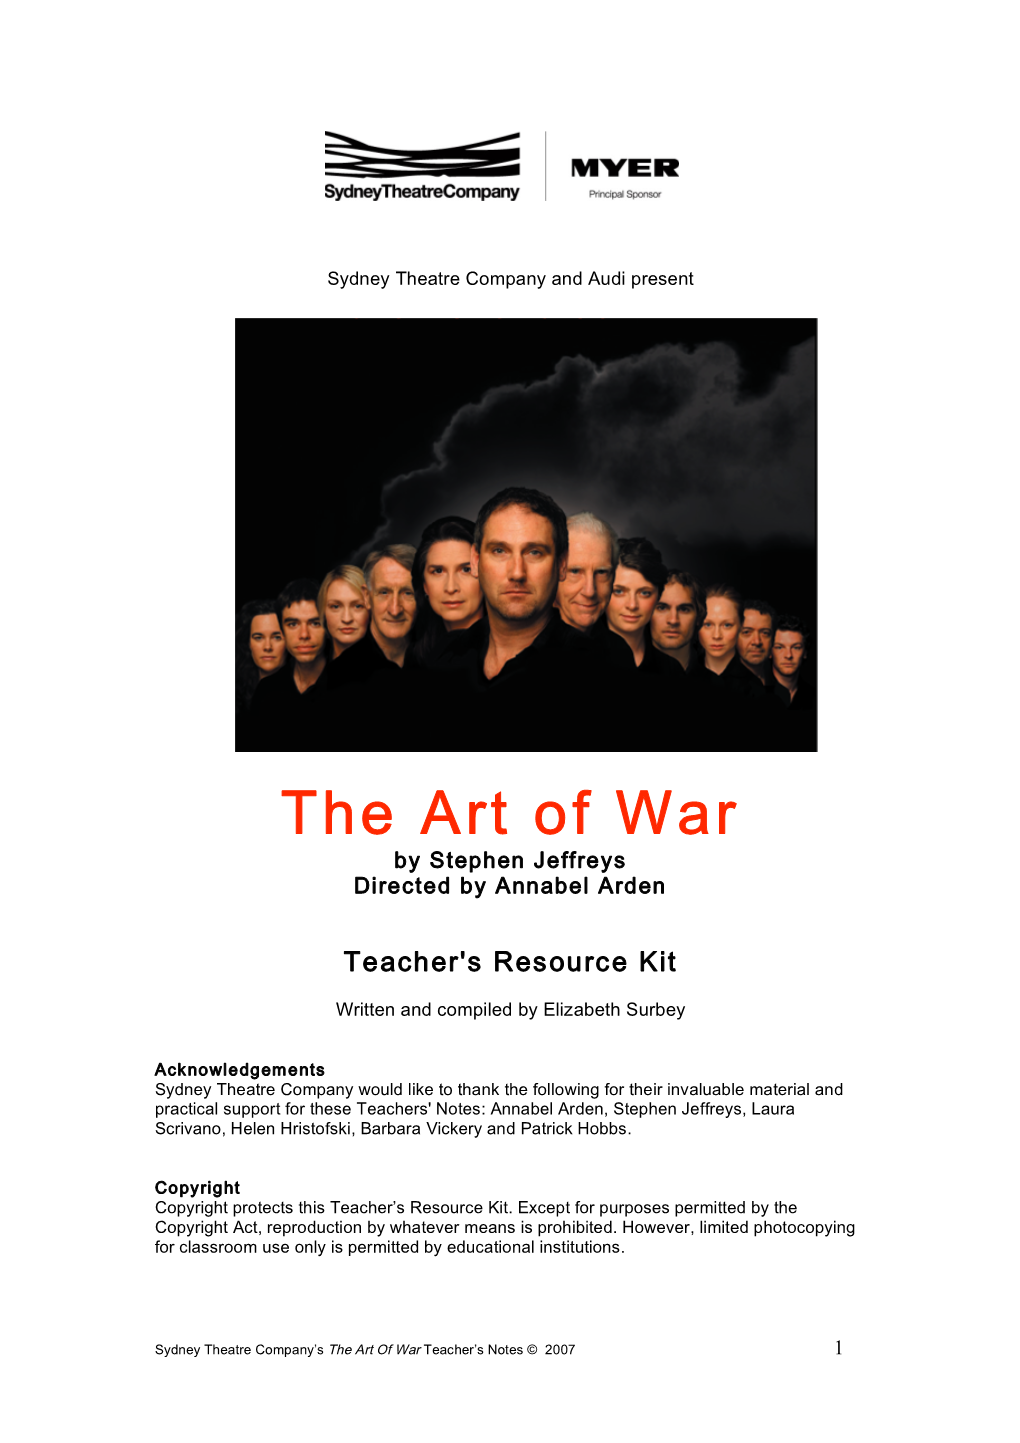 The Art of War by Stephen Jeffreys Directed by Annabel Arden